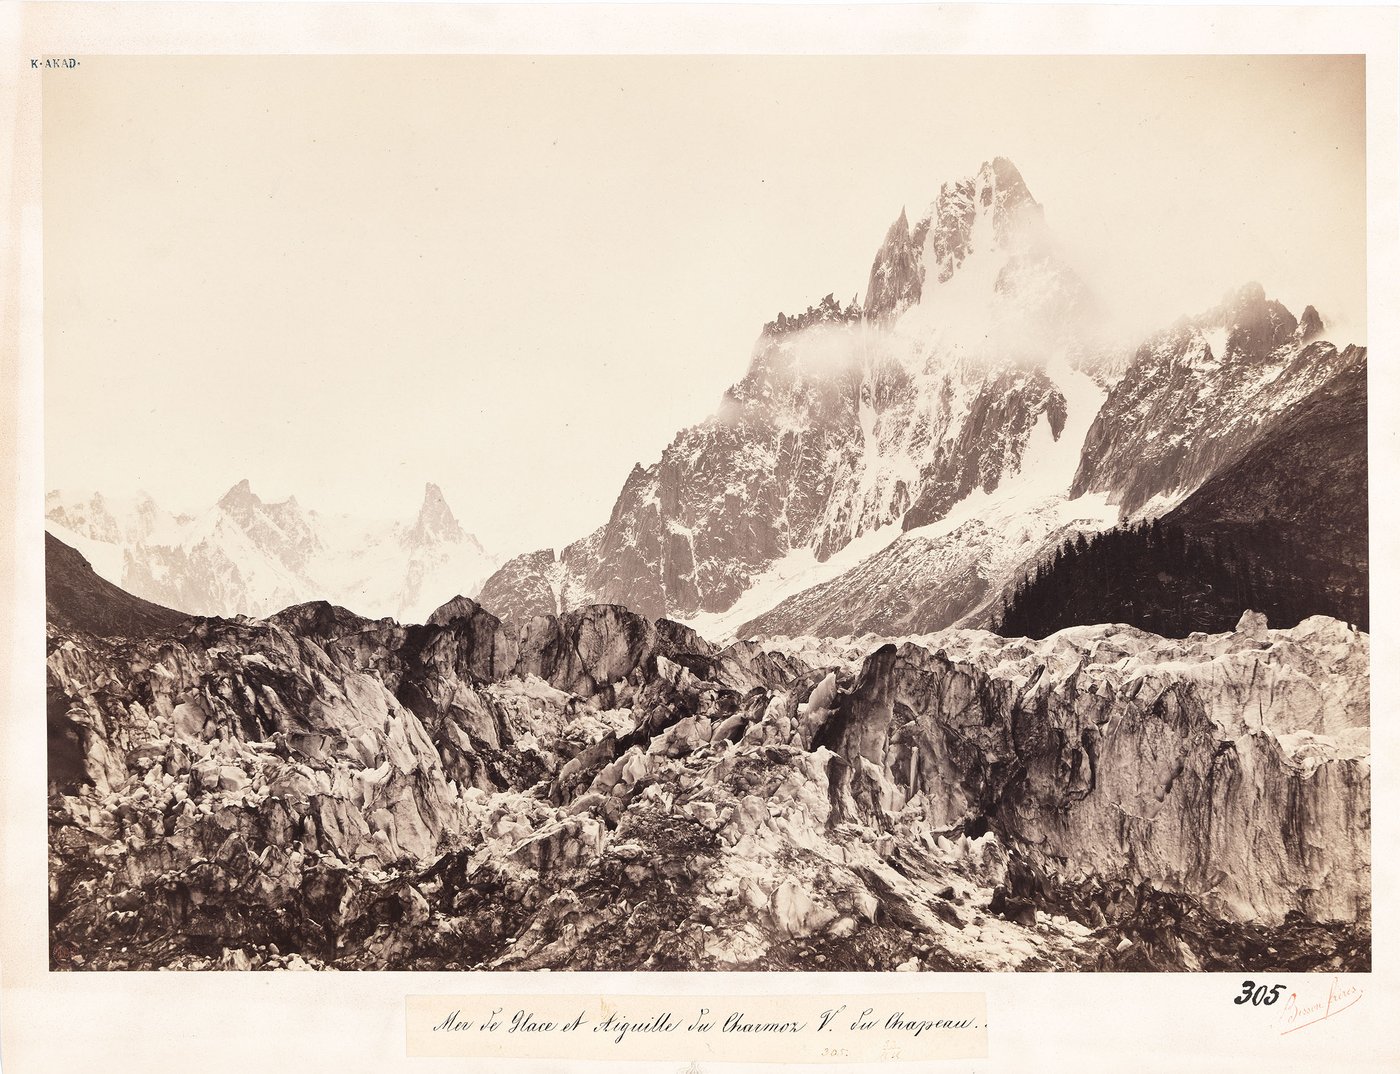 Black and white photograph of a glacier and partly snow-covered mountain range in the French Alps.